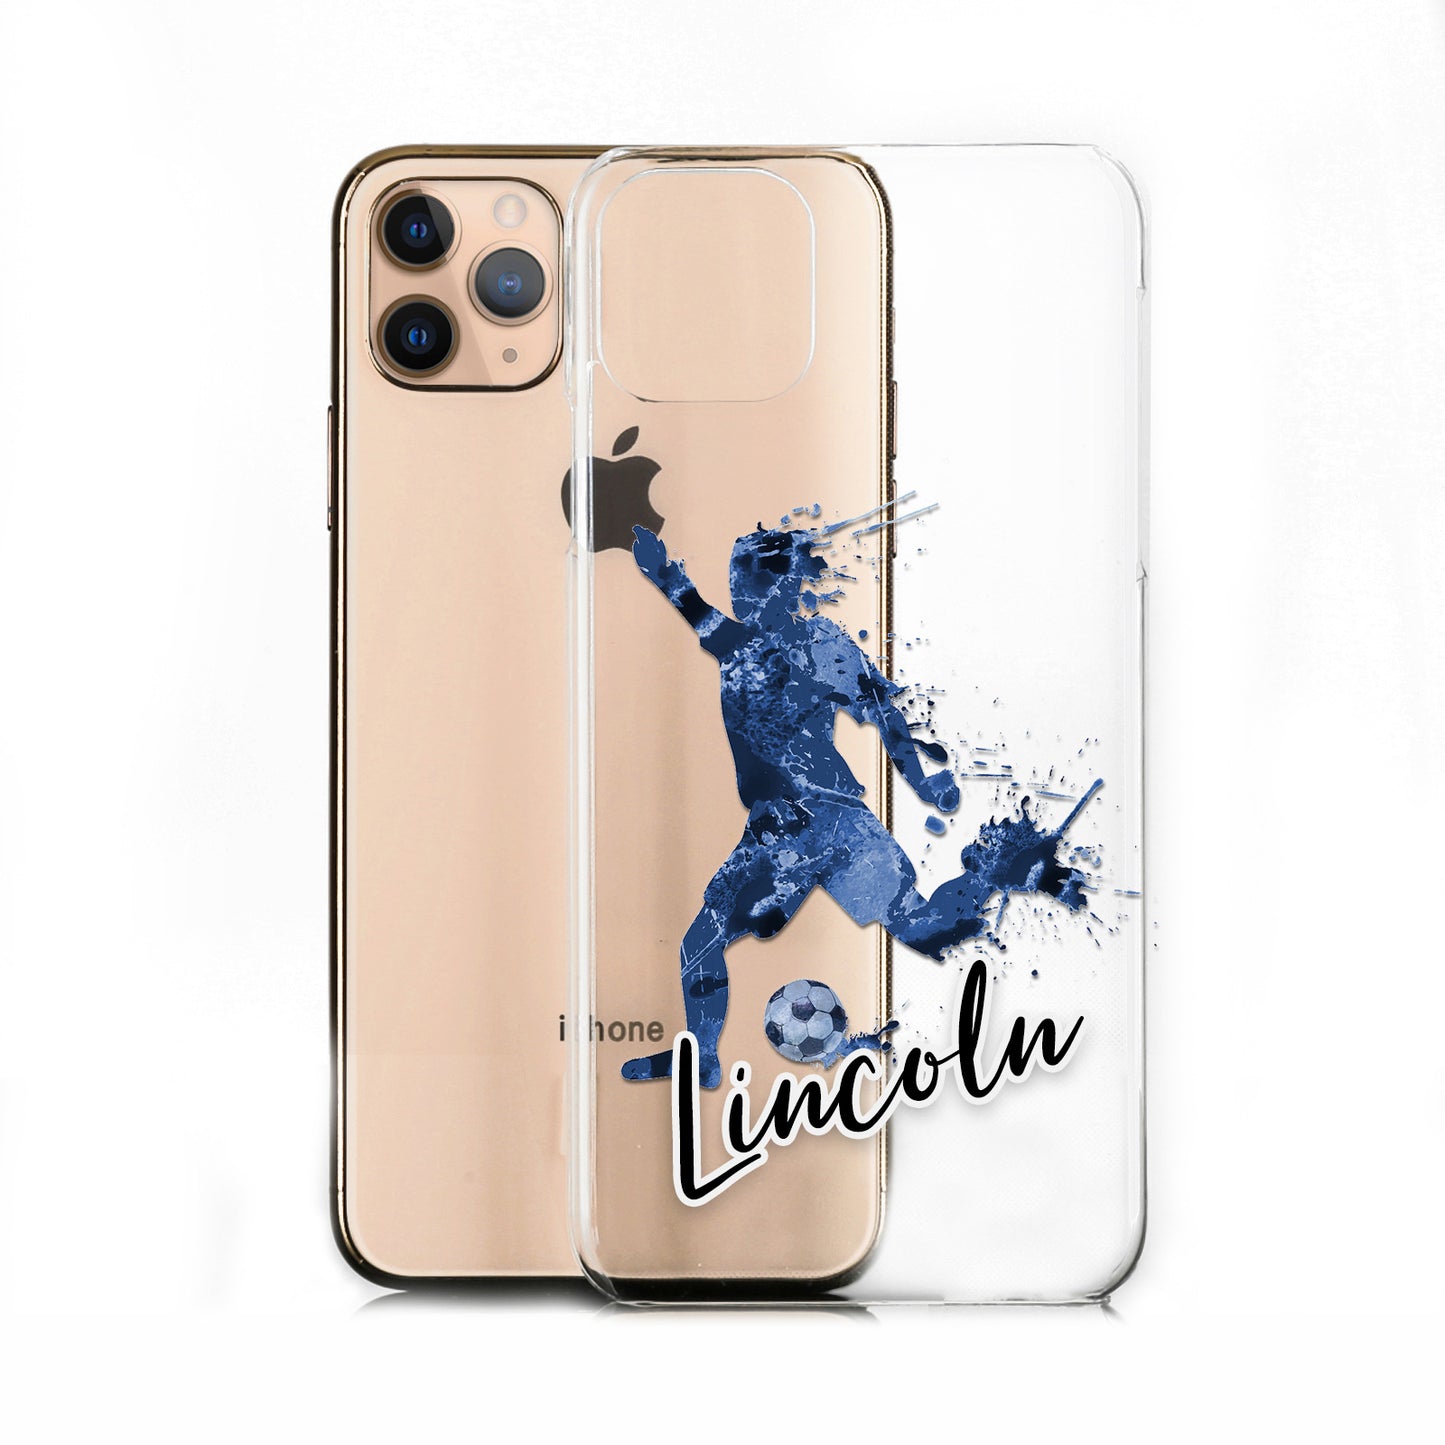 Personalised Honor Phone Hard Case - Vivid Blue Football Star with White Outlined Text